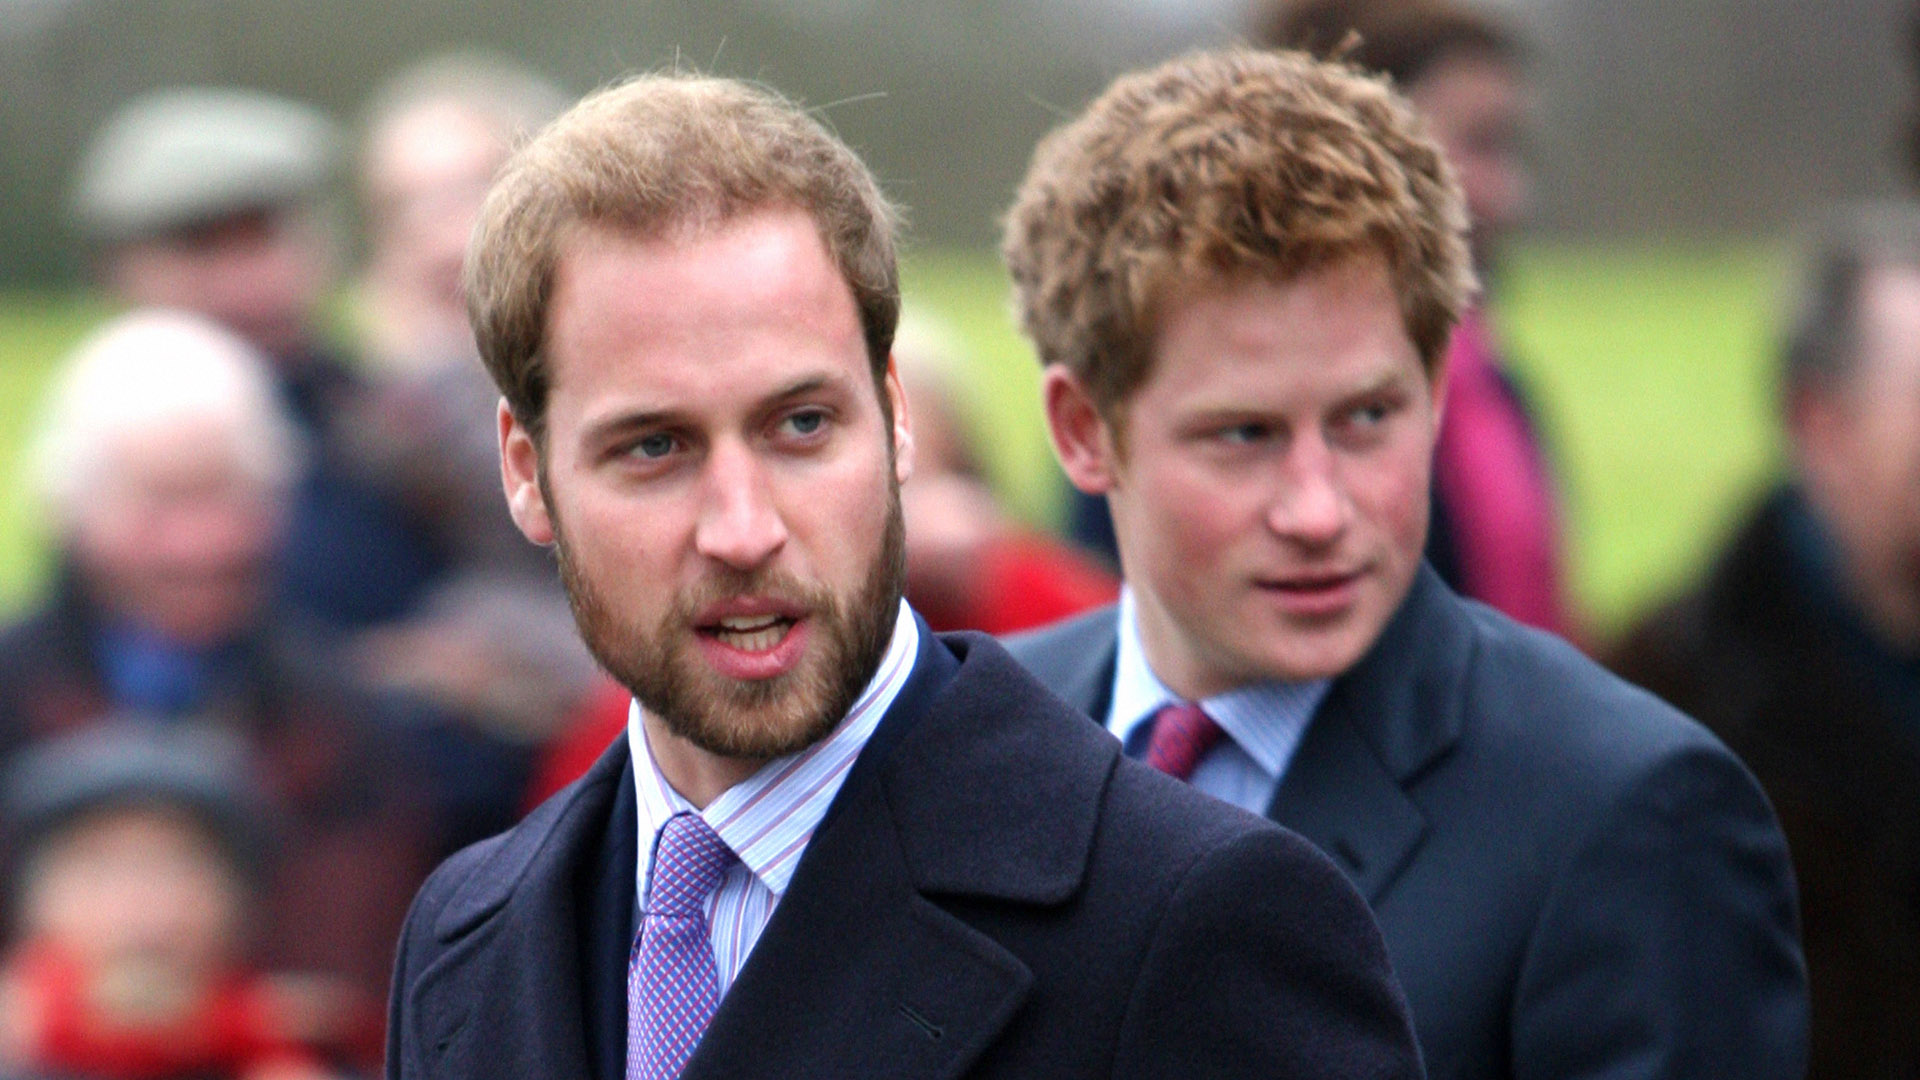 How Much Money William And Harry Inherited After Princess Diana's Death